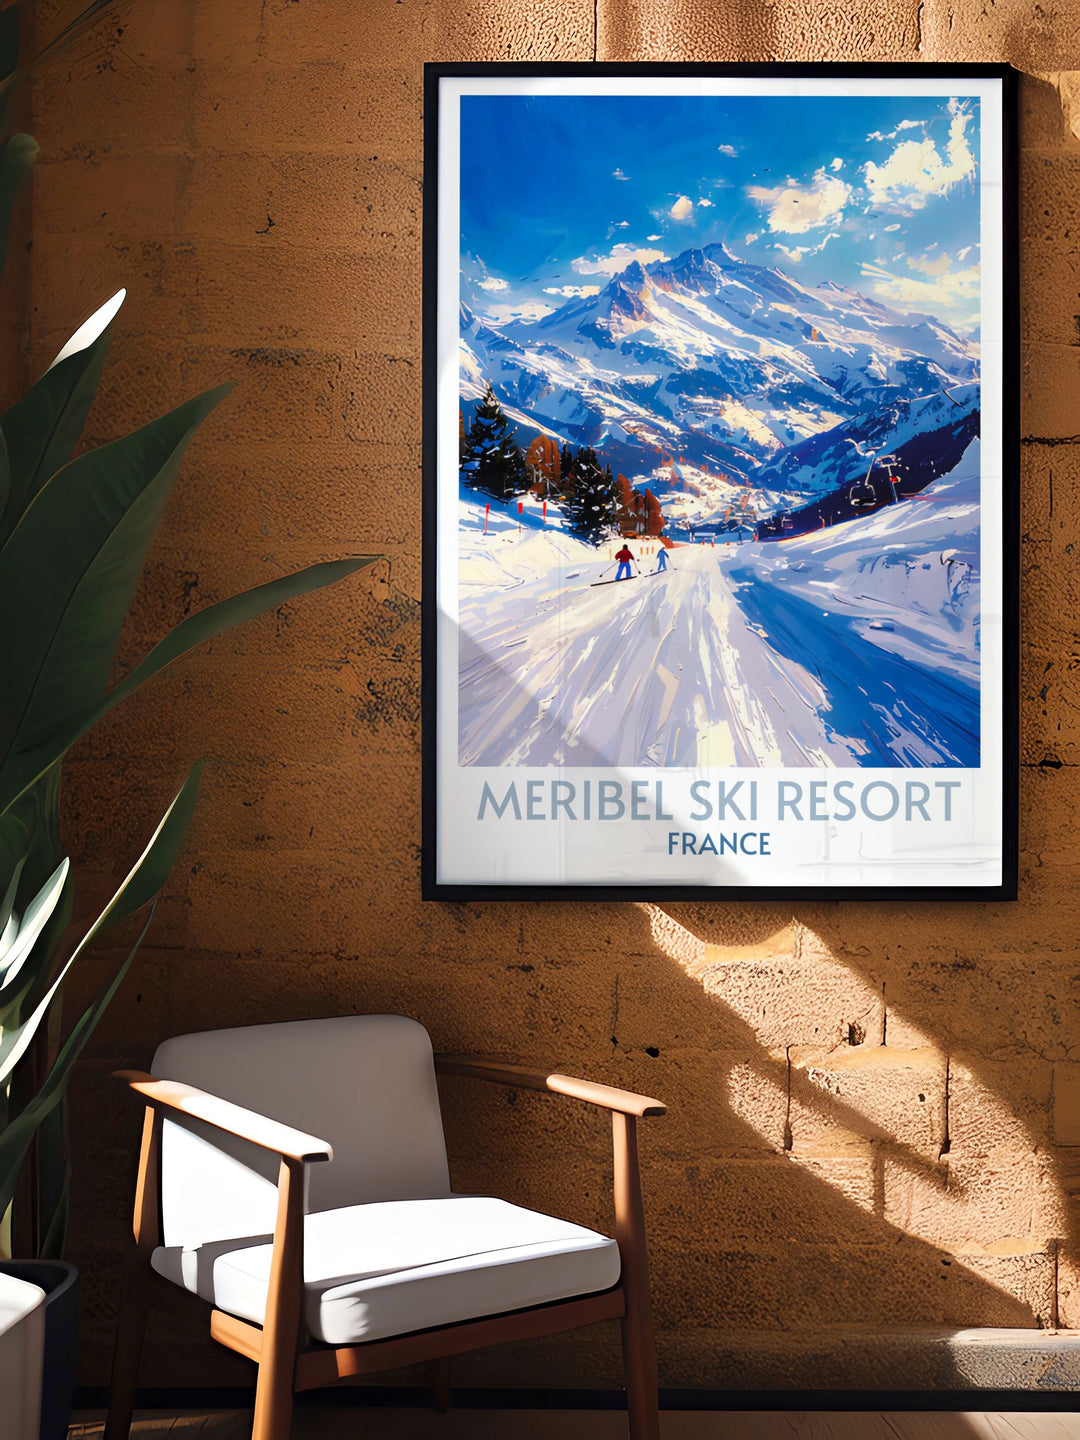 Print capturing the sunset over Meribels ski slopes, with the skys warm hues contrasting against the cool snow.